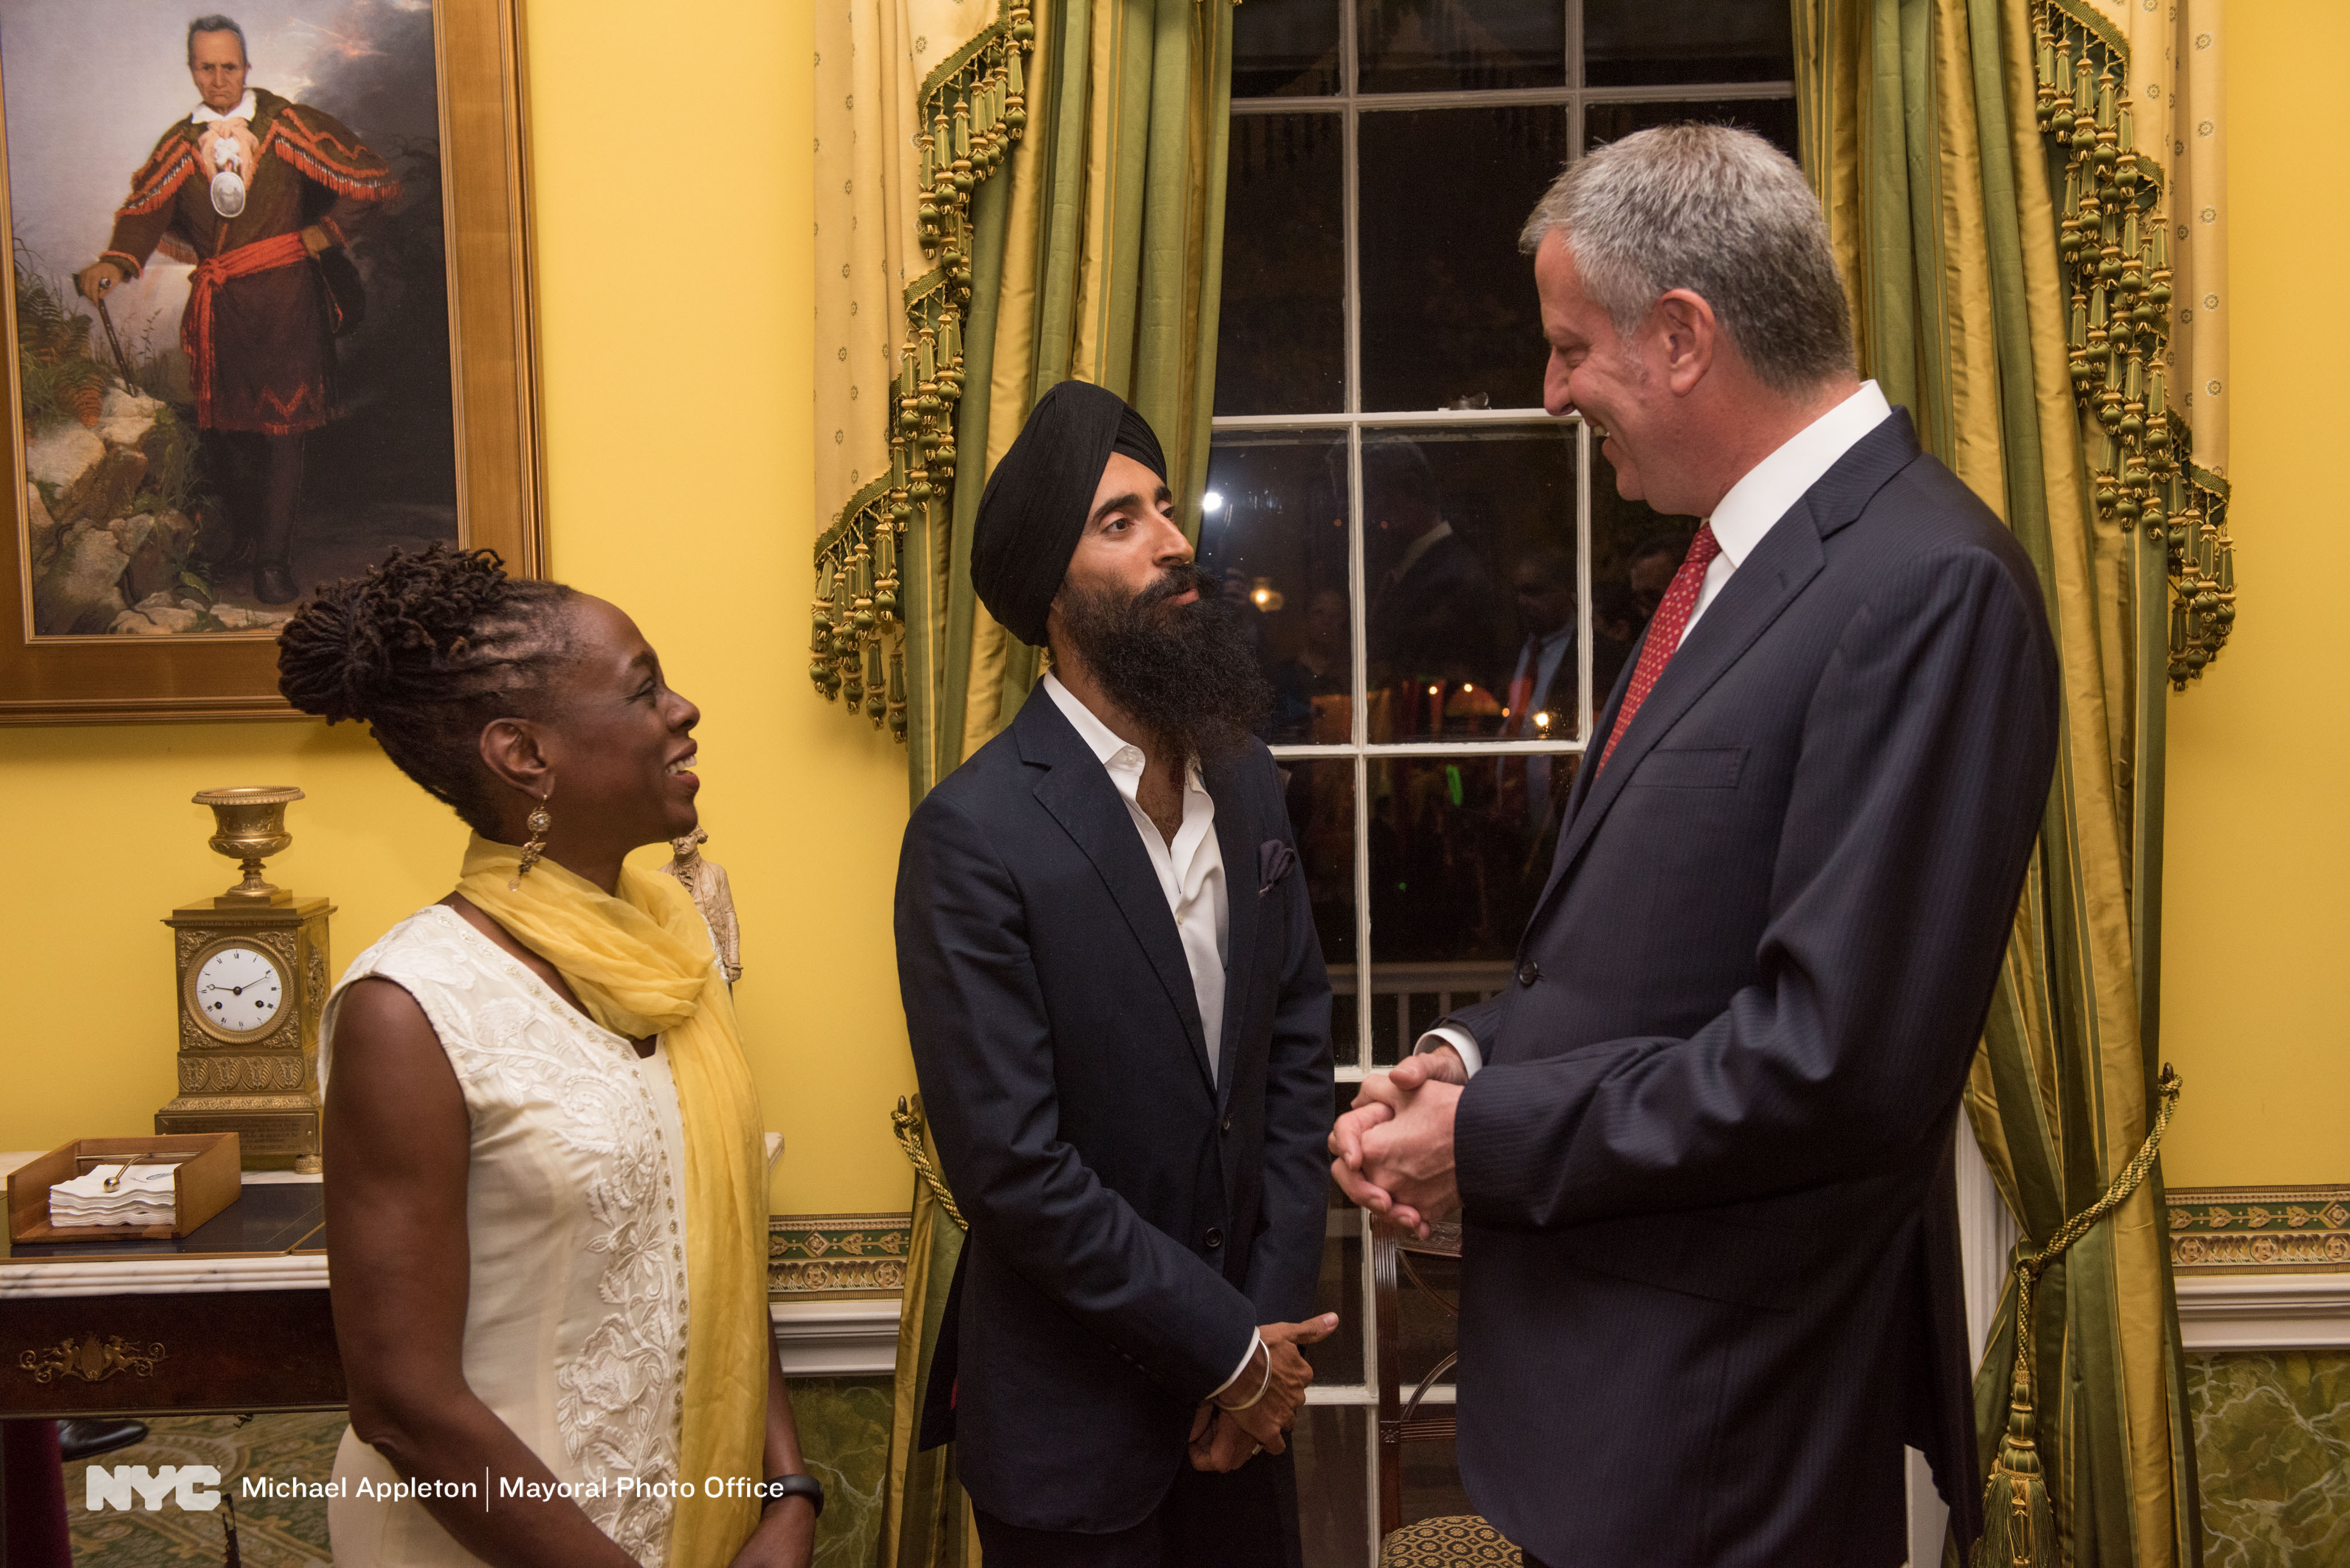 Mayor Bill de Blasio and New York City's First Lady Chirlane McCray host a Diwali celebration at Gracie Mansion with Indian American designer and actor Waris Ahluwalia as the honored guest, on Wednesday, October 19, 2016. Michael Appleton/Mayoral Photography Office